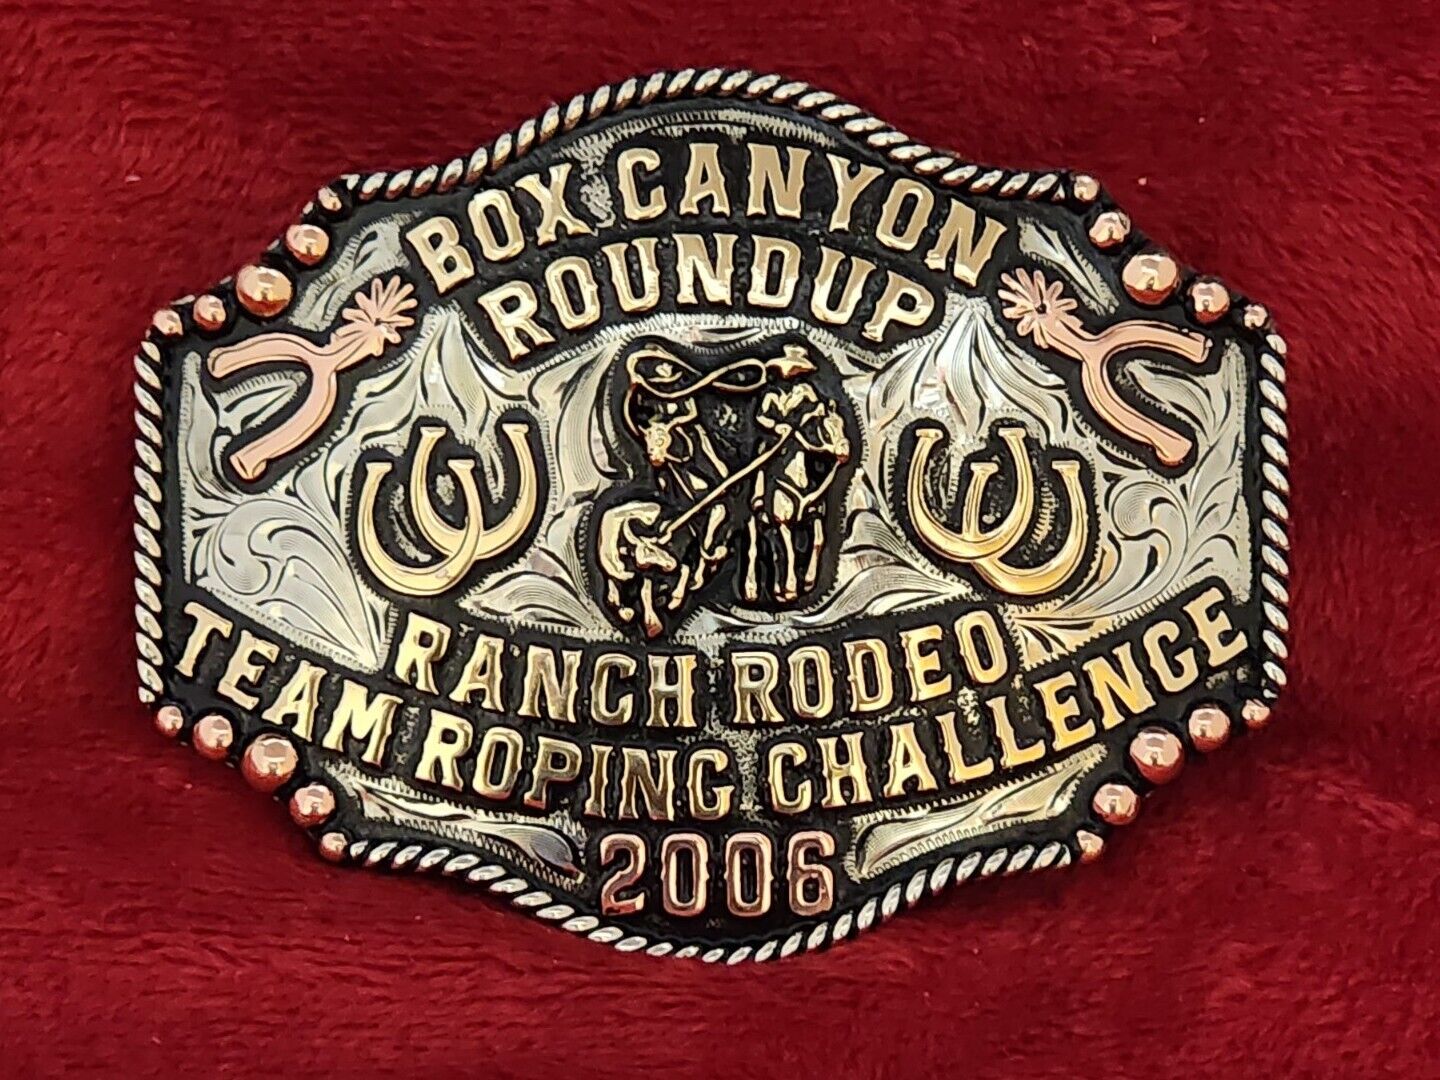 TROPHY CHAMPION RODEO BELT BUCKLE☆2006☆CANYON RANCH RODEO TEAM ROPING☆RARE☆721